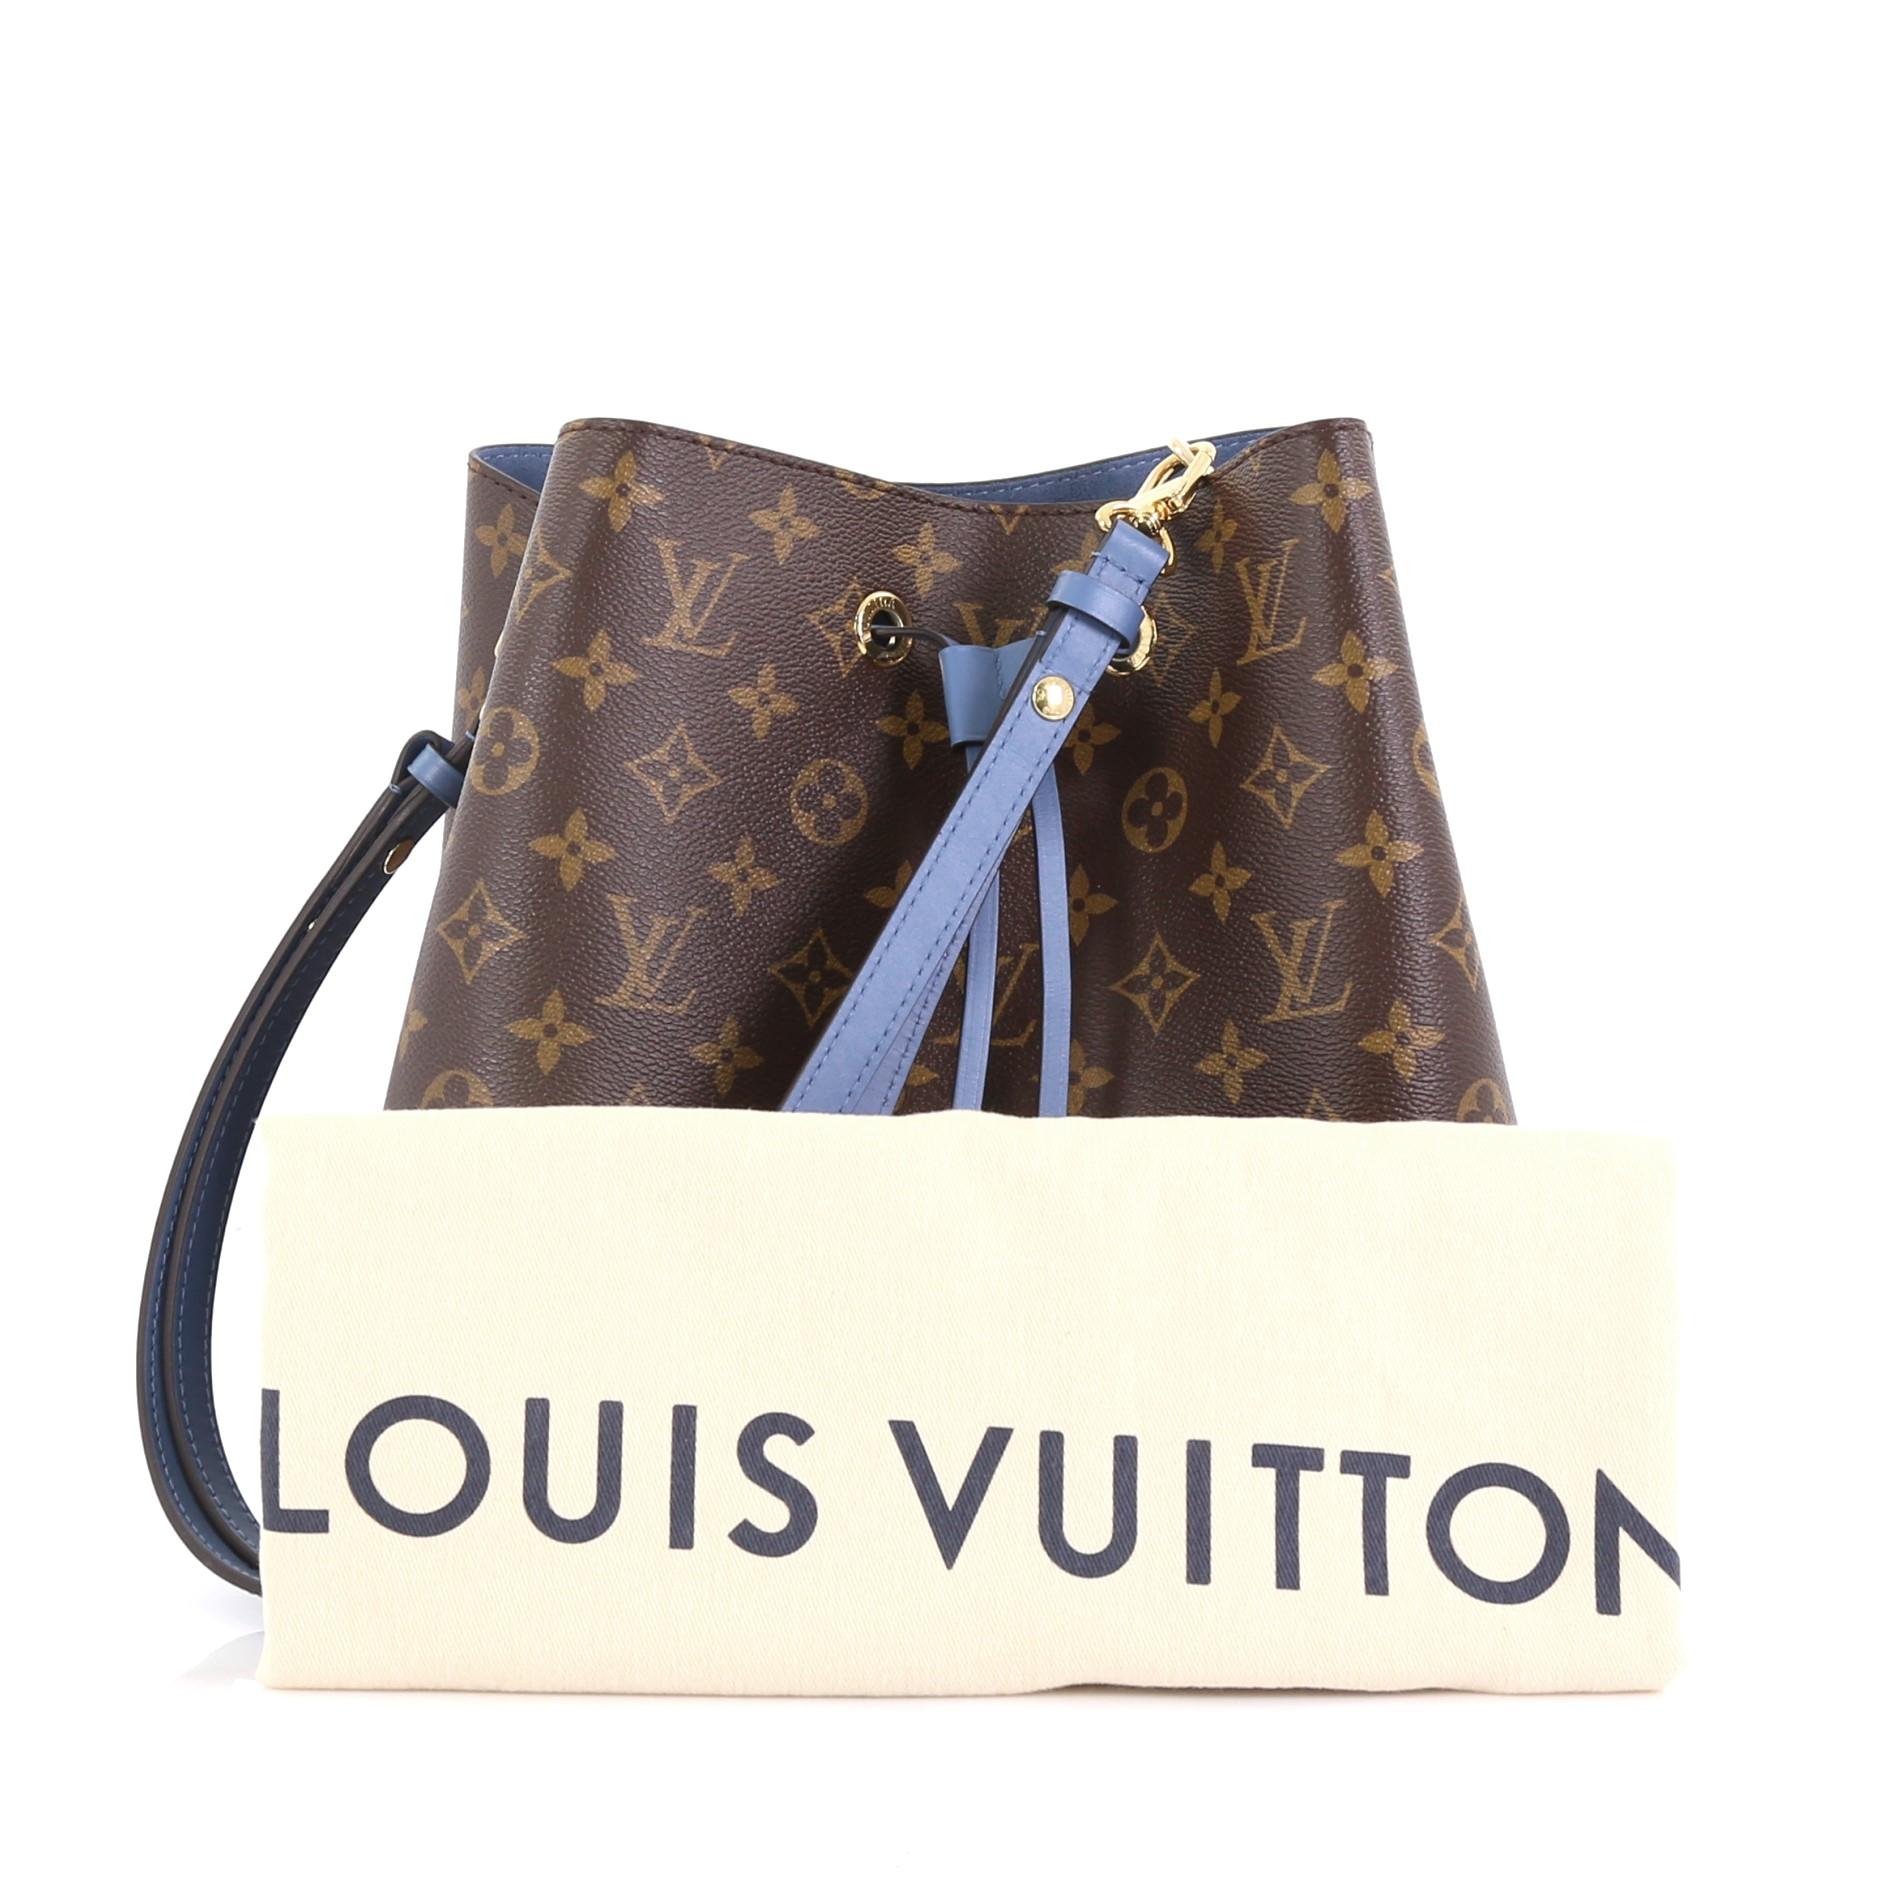 This Louis Vuitton Neonoe Handbag Monogram Canvas, crafted from brown monogram coated canvas and light blue leather, features a leather shoulder strap, leather trim, and gold-tone hardware. Its drawstring closure opens to a light blue microfiber